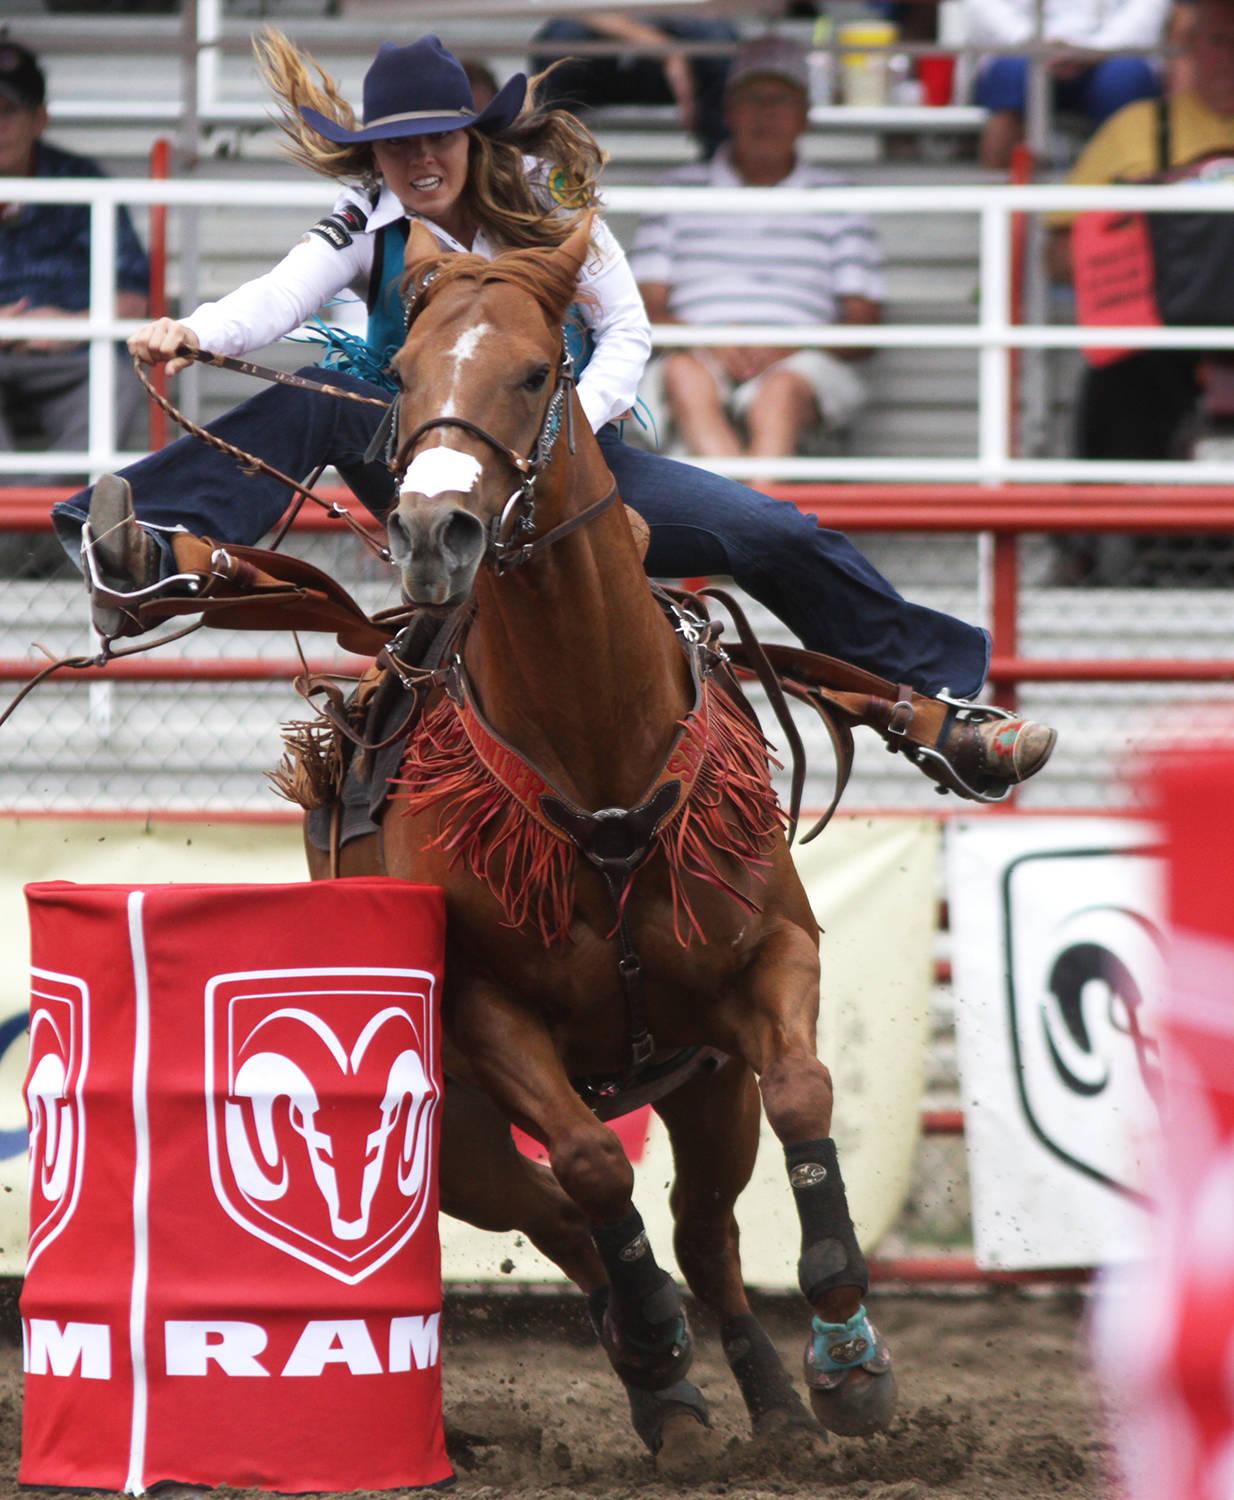 Barrel racer Rene LeClerq of Holden squeezed herself in the 12th spot of the barrel racing line up with a time of 17.858 seconds. The next fastest time is a close one with 17.853 seconds by Taylor Shields.